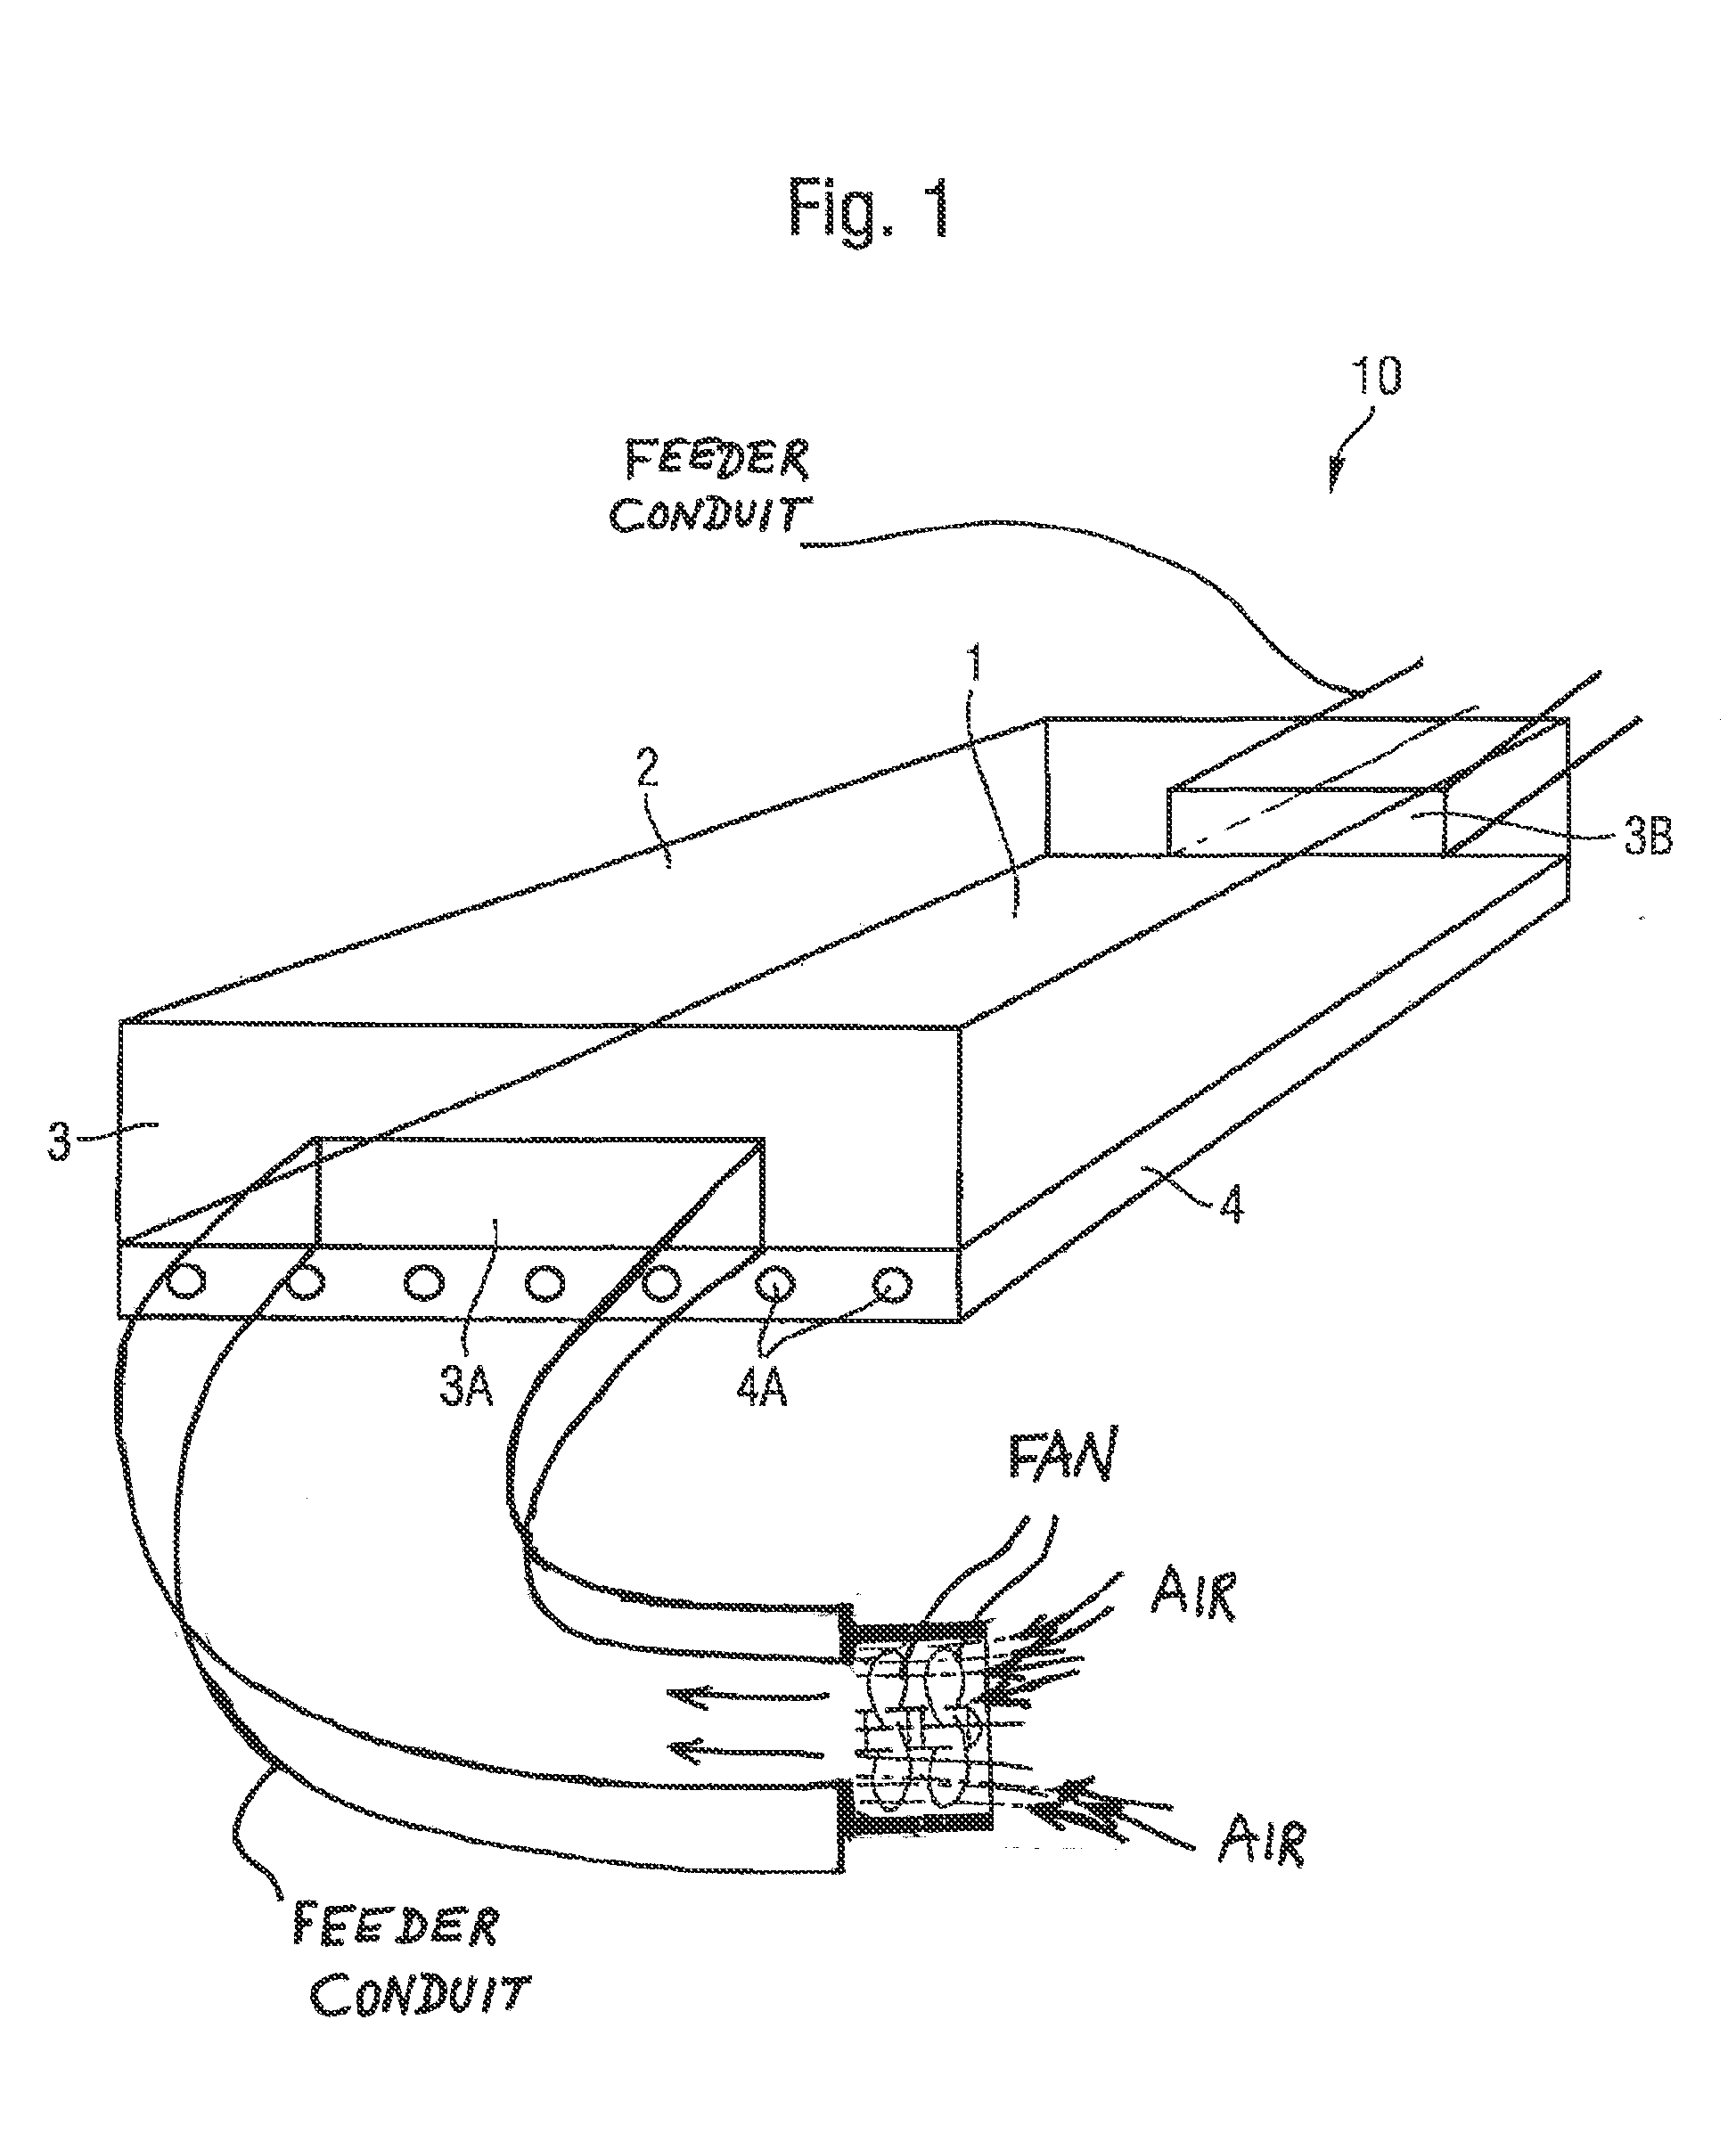 Light or weathering testing device comprising a specimen enclosure with an integrated UV radiation filter